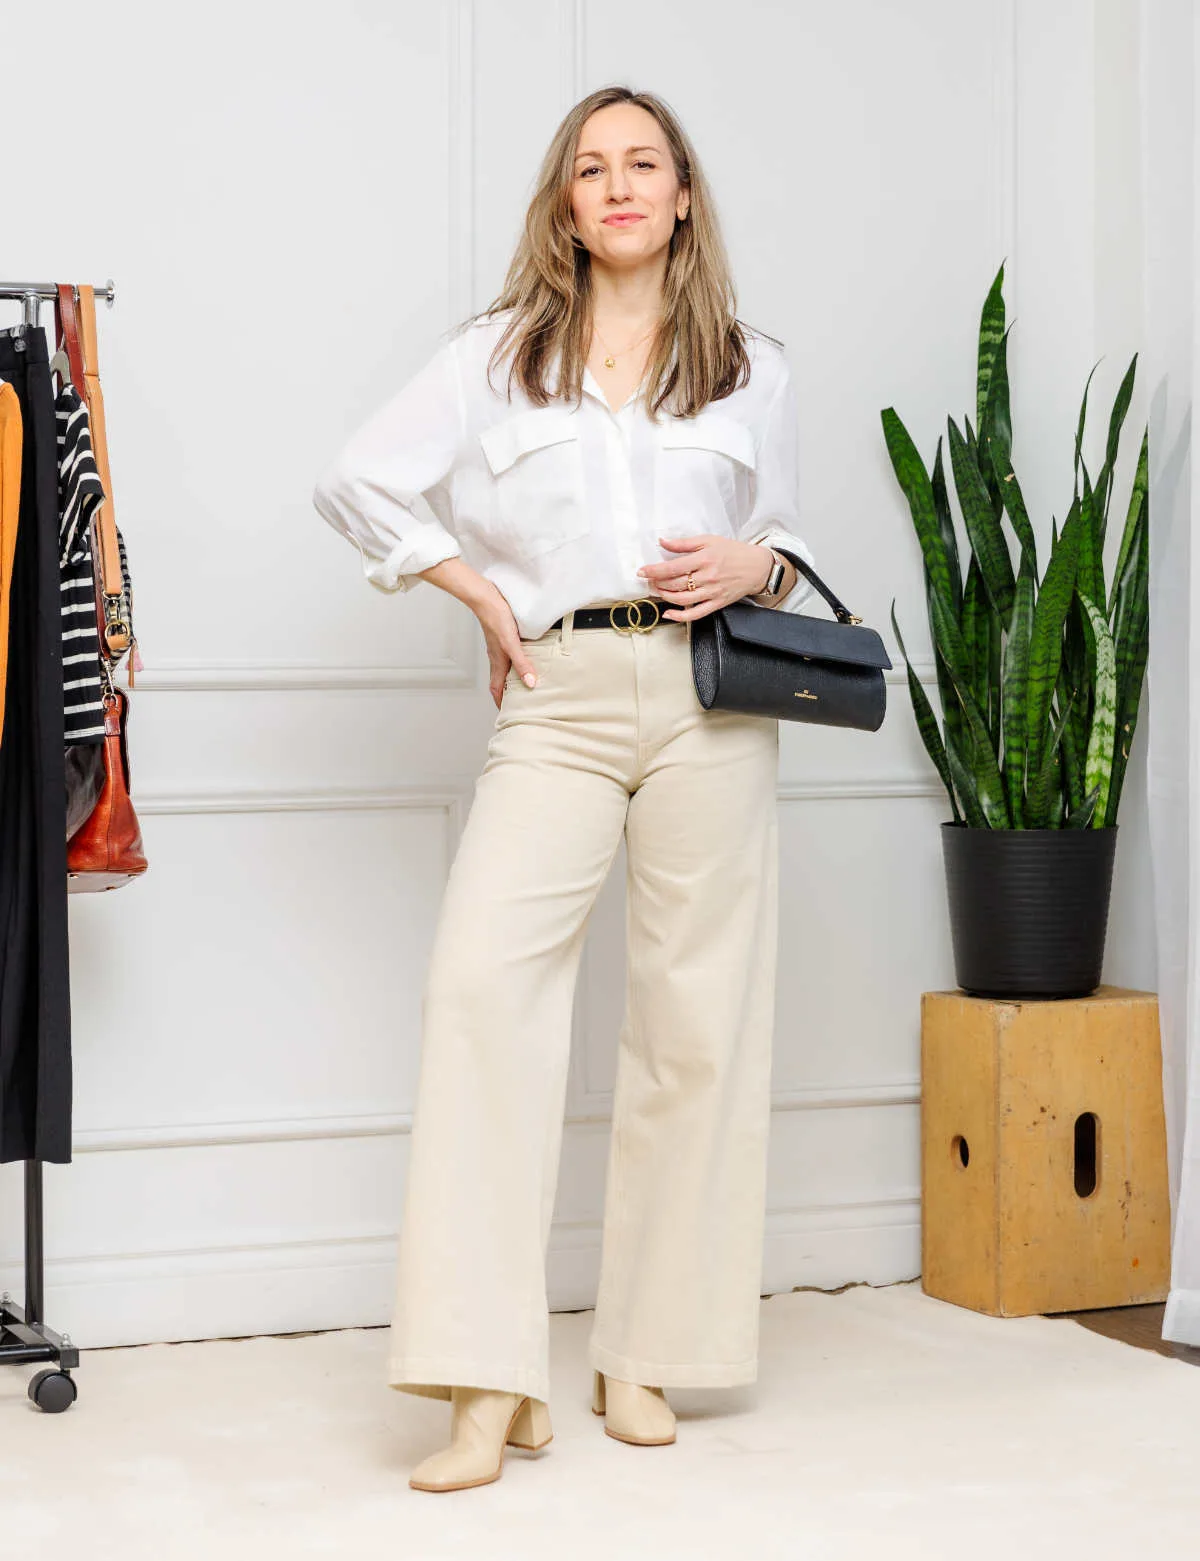 High Waisted Wide Leg Dress Pants - The Untidy Closet  High waist outfits,  Wide leg pants outfit, Khaki pants outfit women